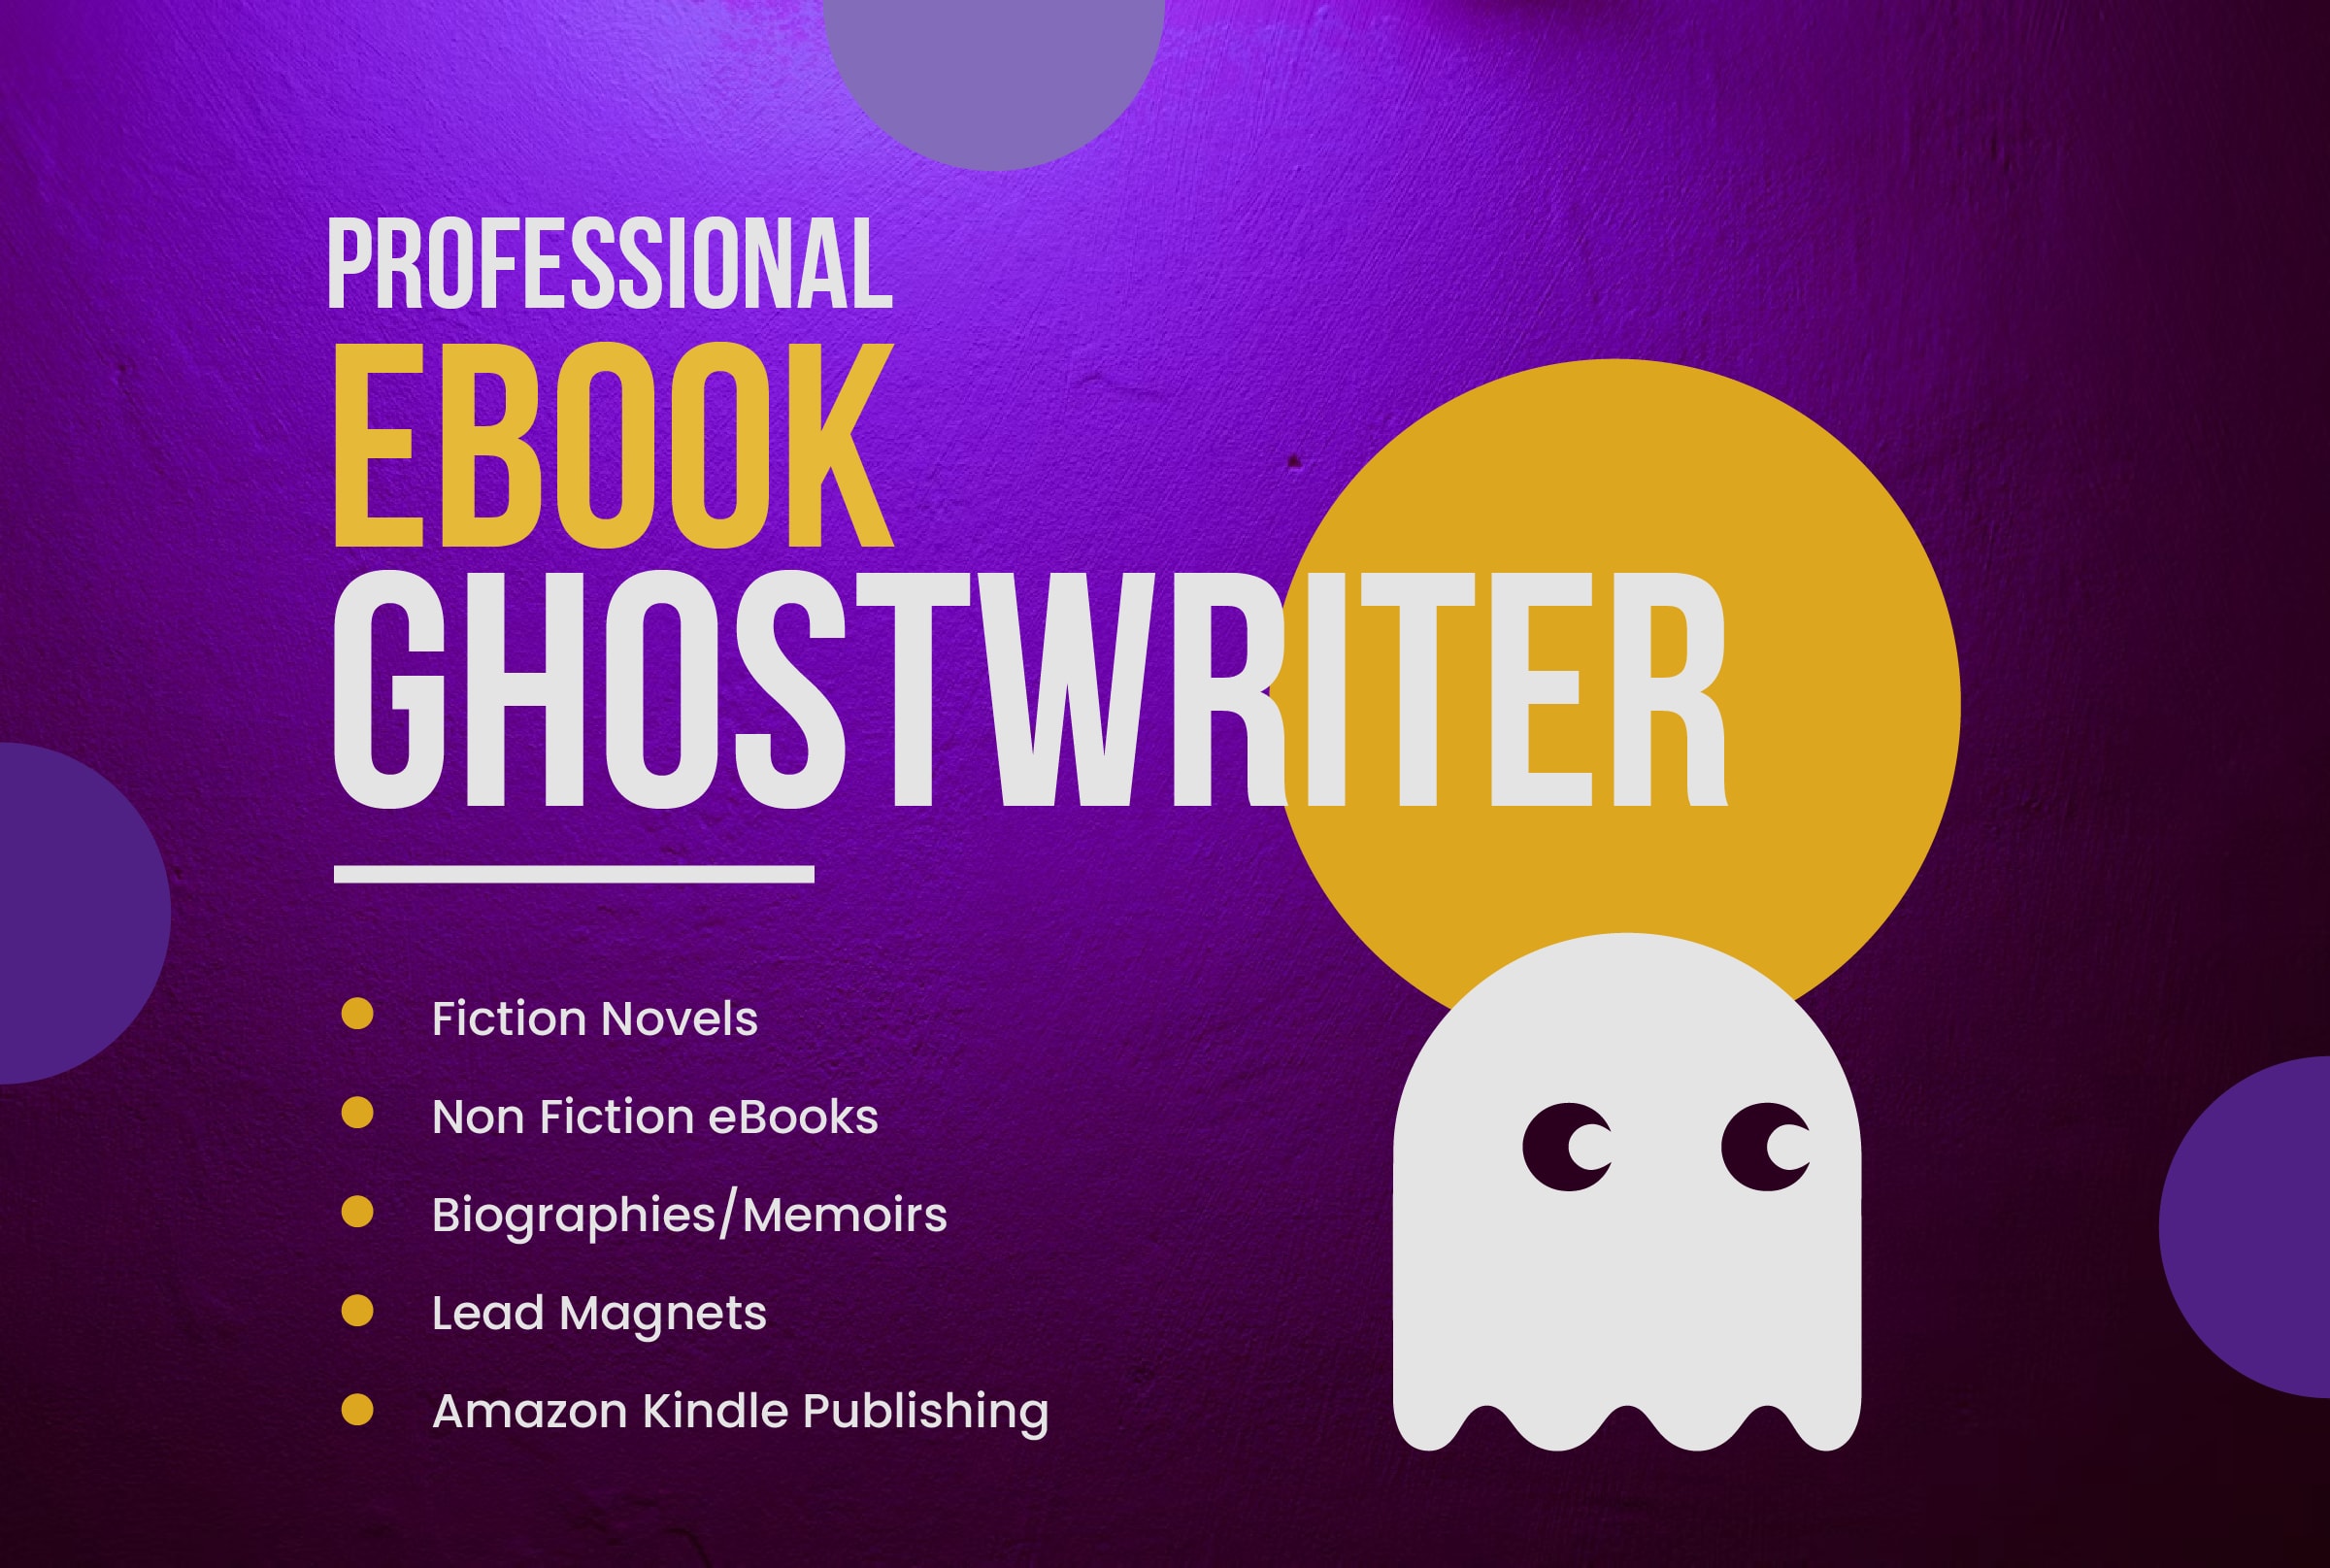 Ghostwrite your nonfiction book, kindle ebook, paperback by